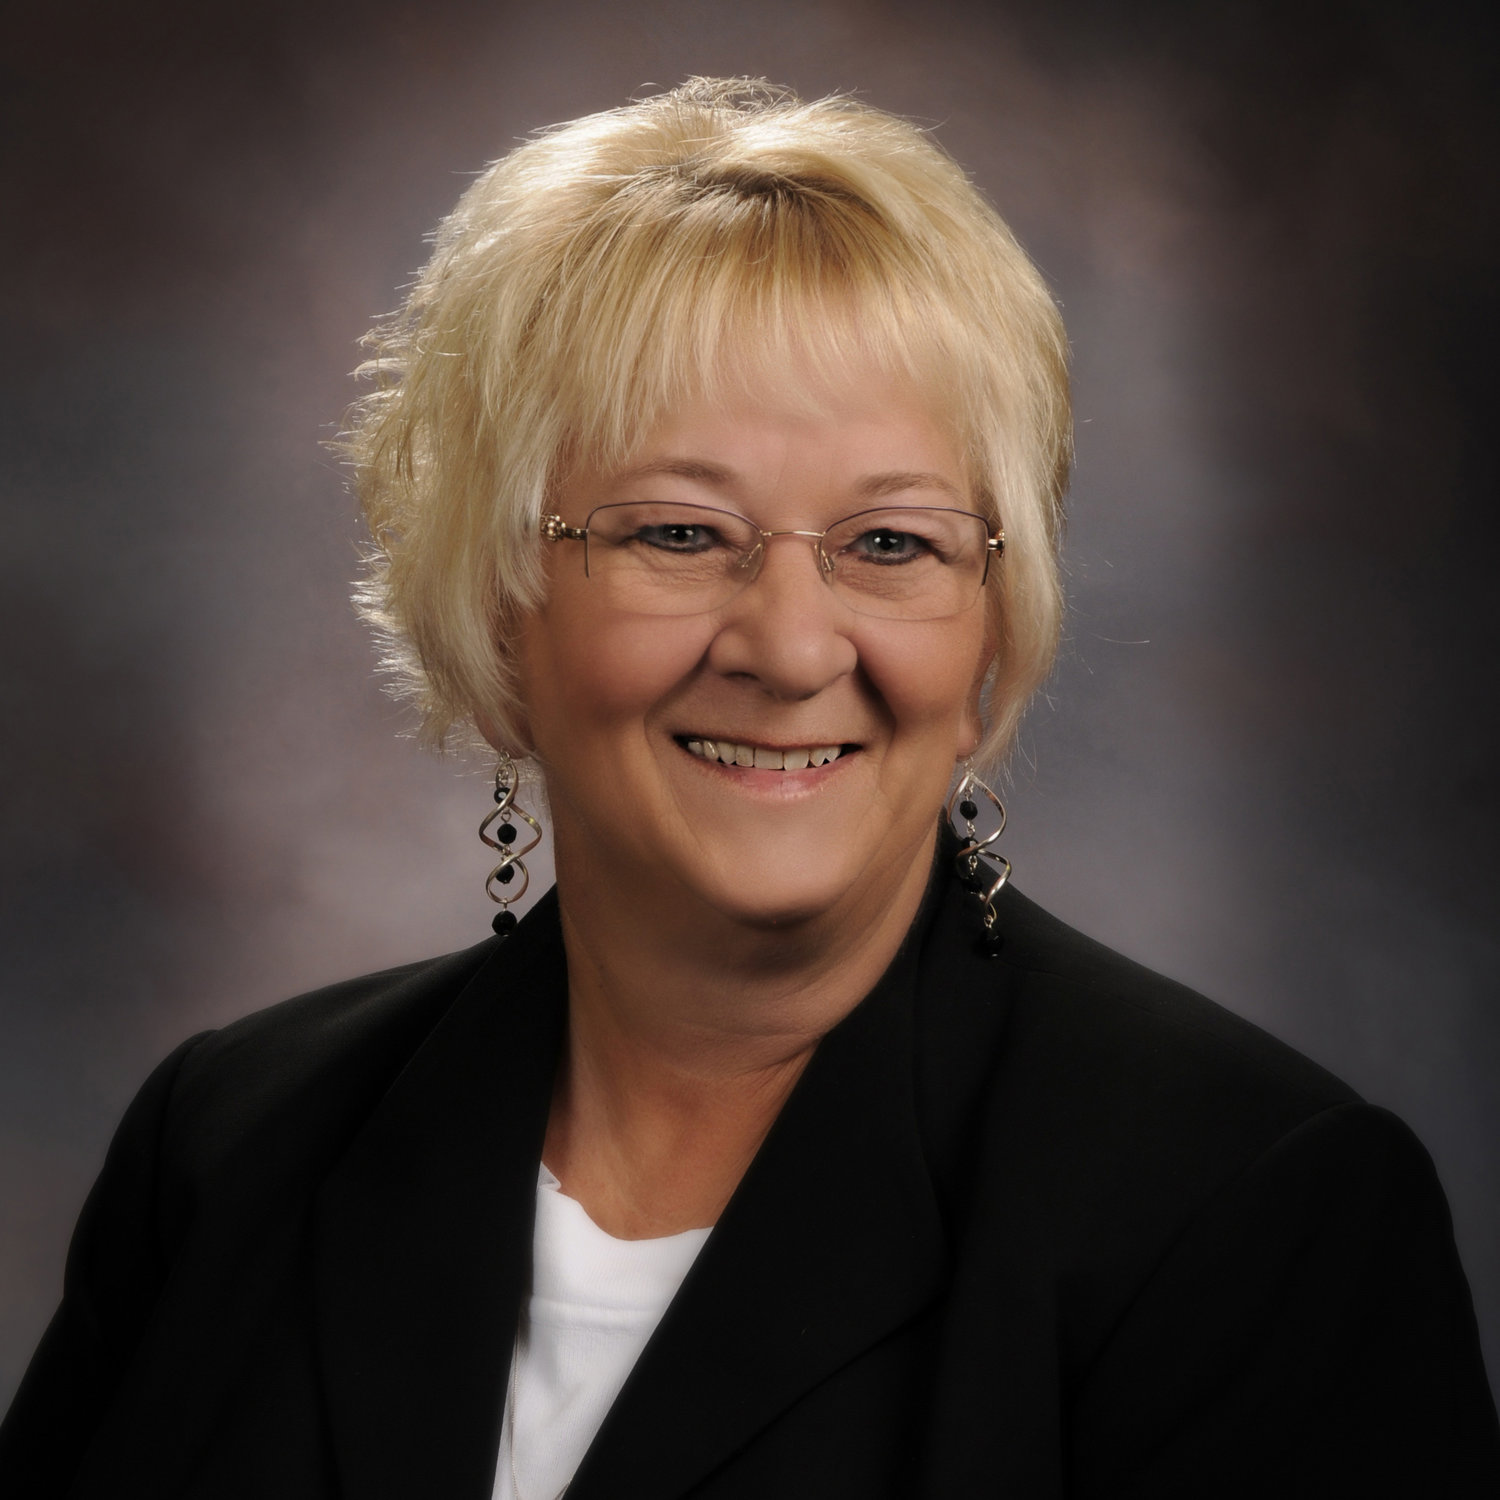 Cathy Johnson, the vice president of Existing Industry for the Fayetteville Cumberland Economic Development Corp., has retired after 30 years in local economic development.